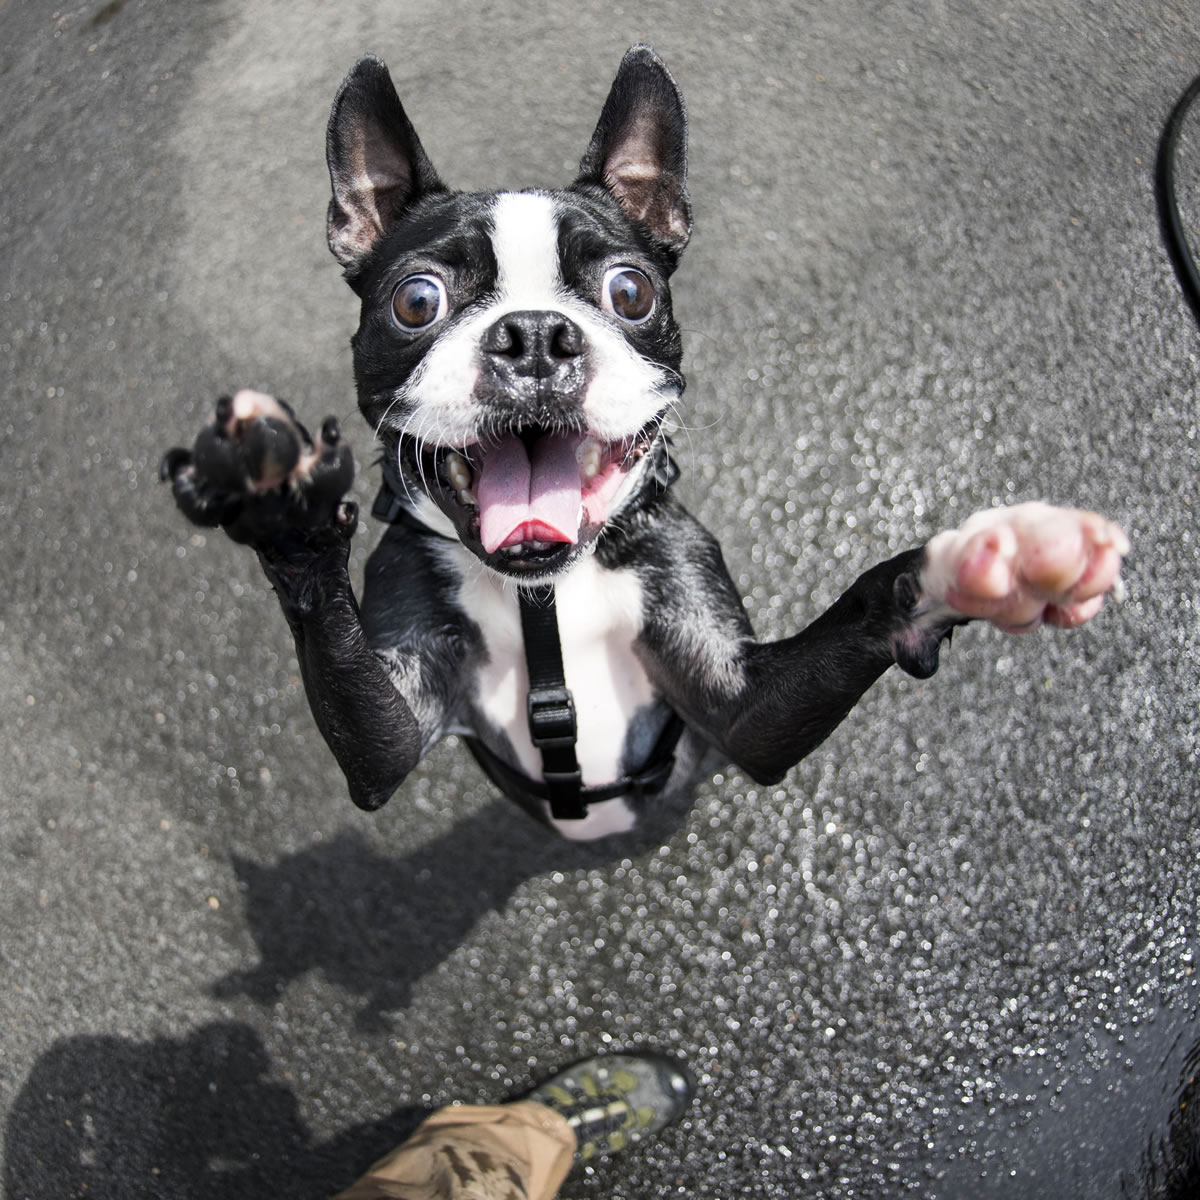 Piggy, a 2-year-old Boston terrier, stands for photographer Elias Weiss Friedman in New York.